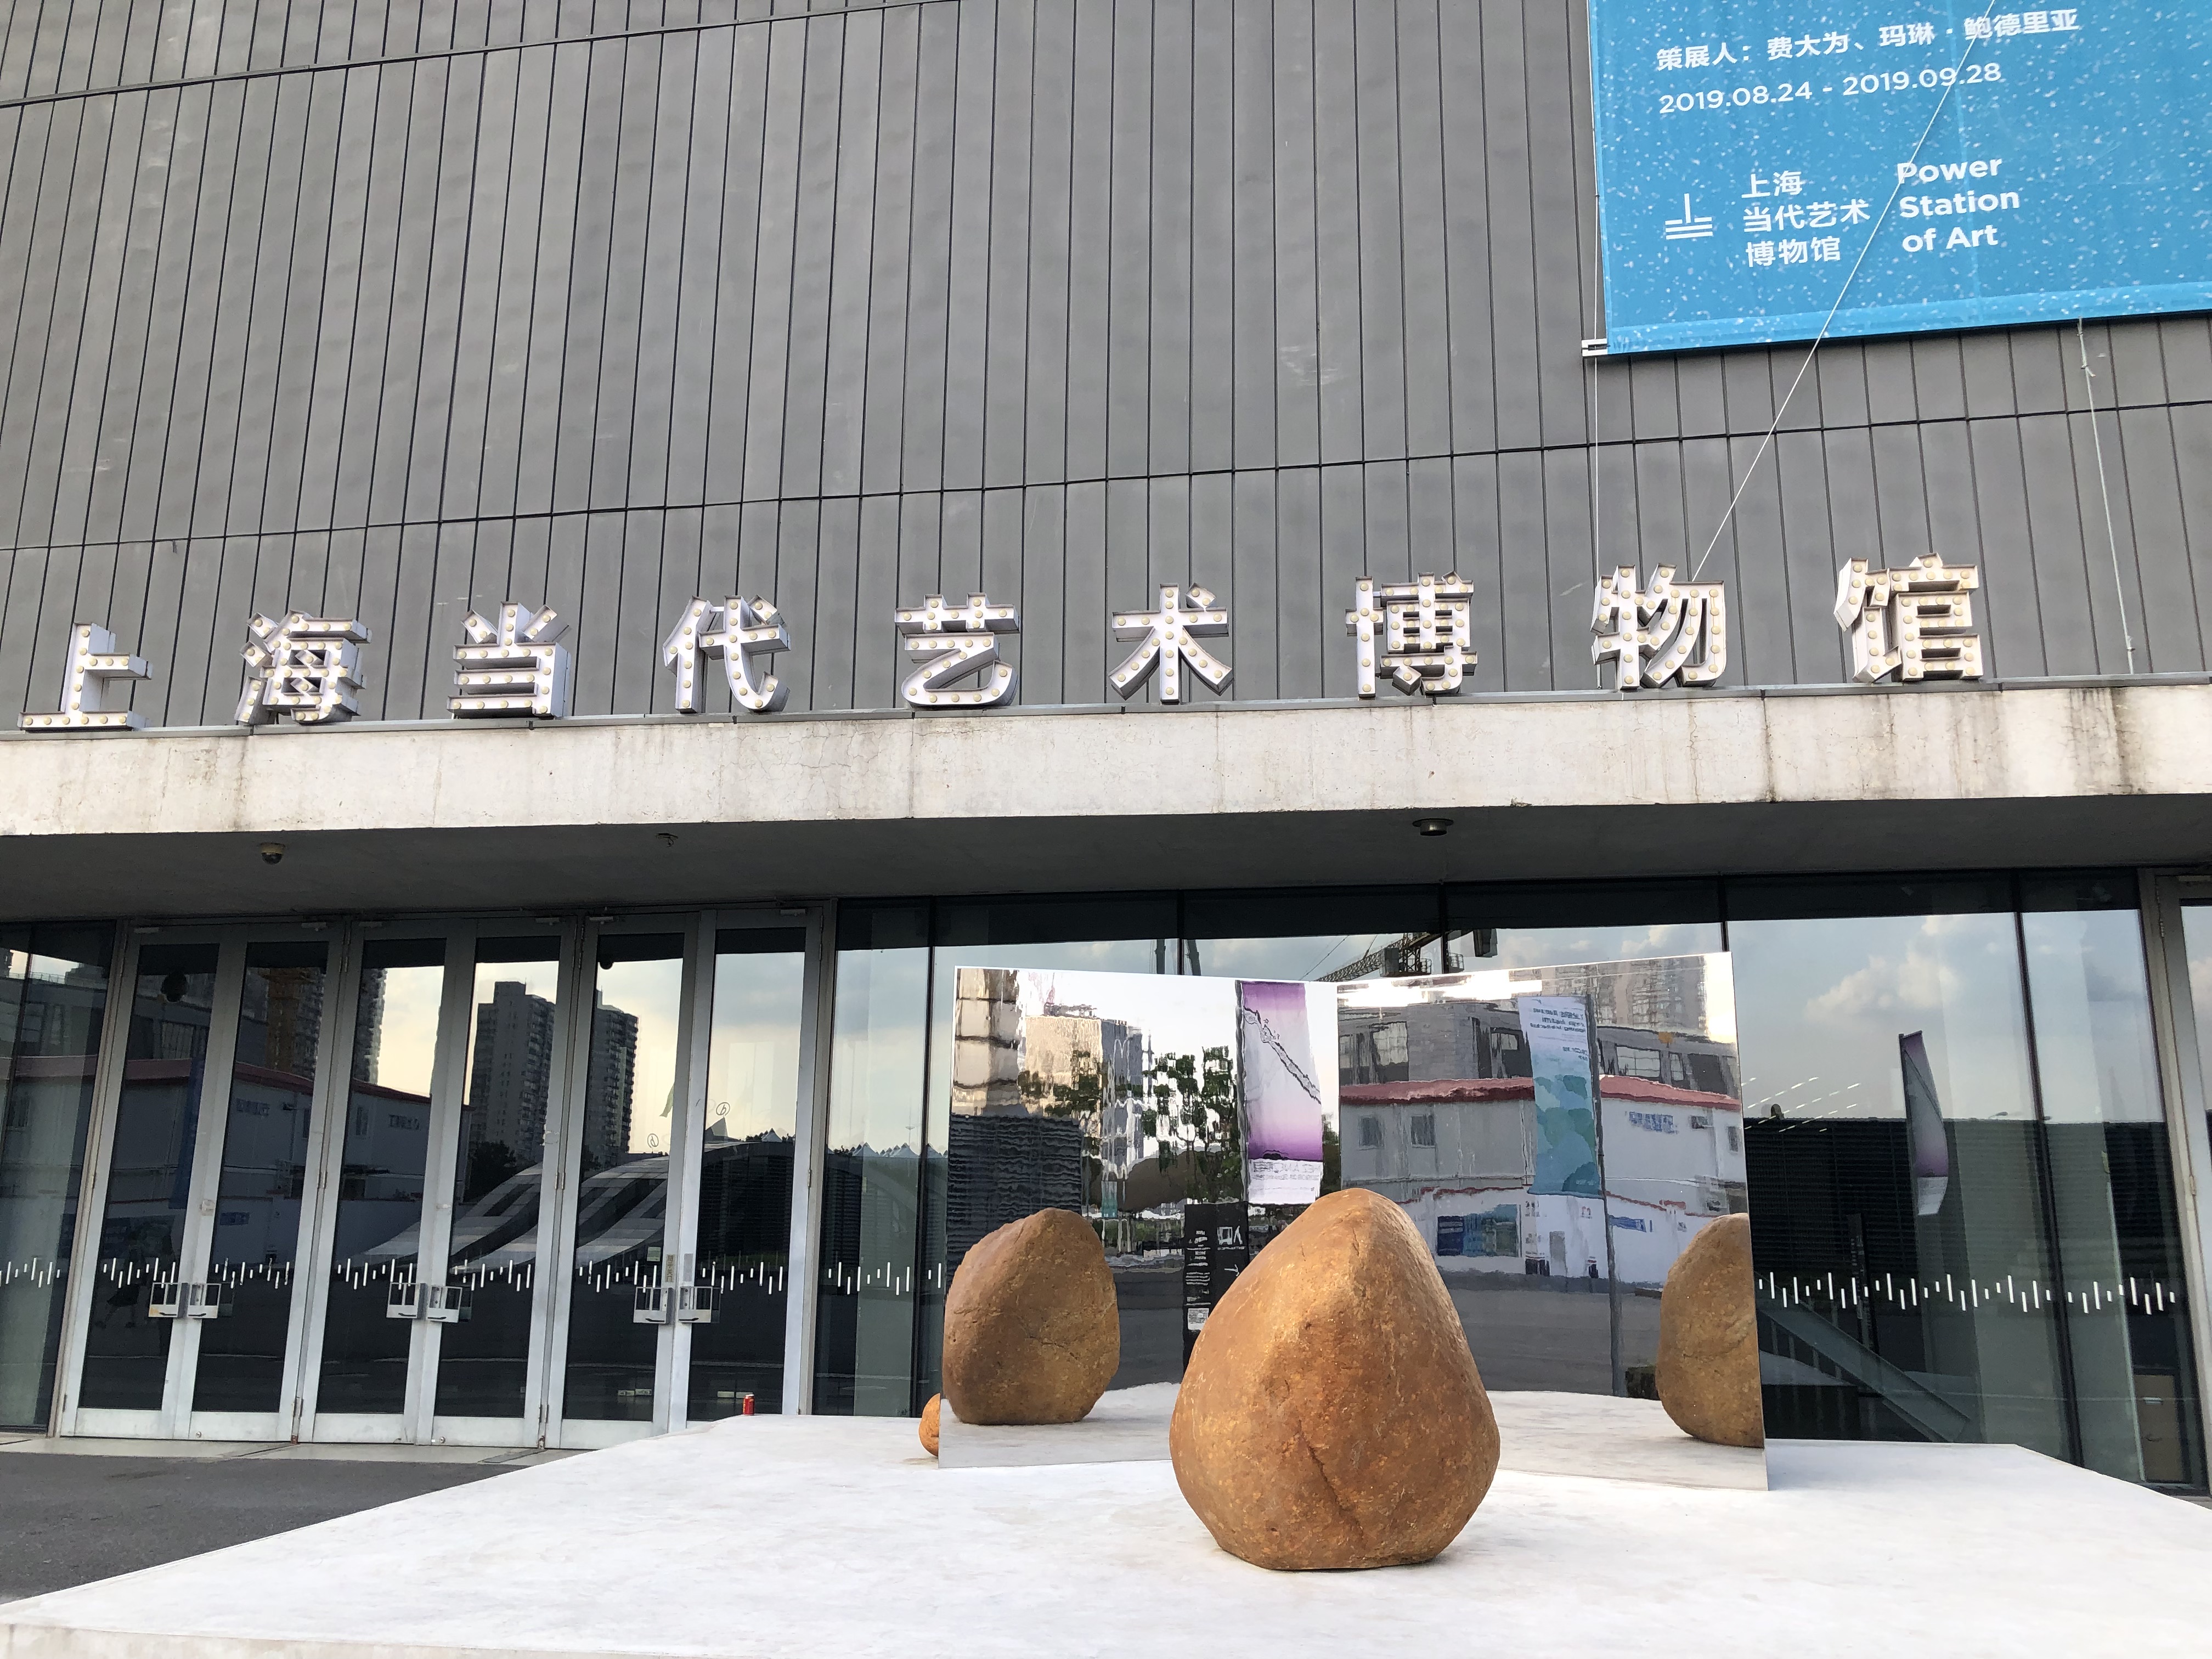 The Power Station of Art (PSA), completed in 2012 in the West Bund, has served as the venue for the Shanghai Biennale ever since. Like the Tate Modern in London, the PSA resides in a converted power plant, which serves as the eponym of the museum.